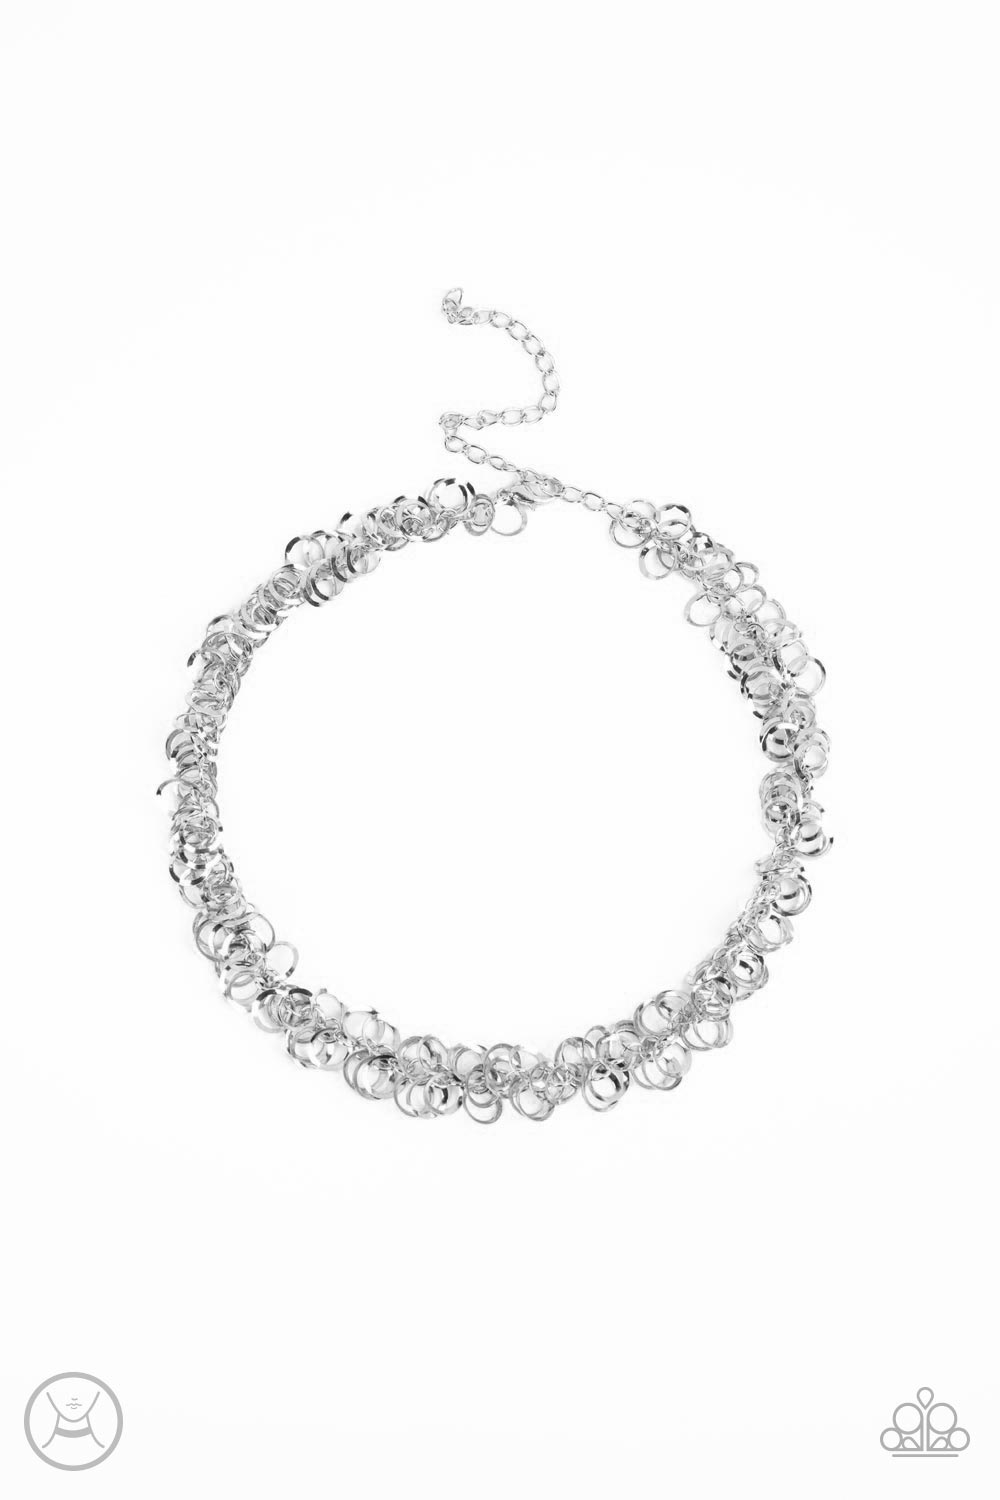 Paparazzi Cause a Commotion - Silver Choker Necklace - A Finishing Touch Jewelry